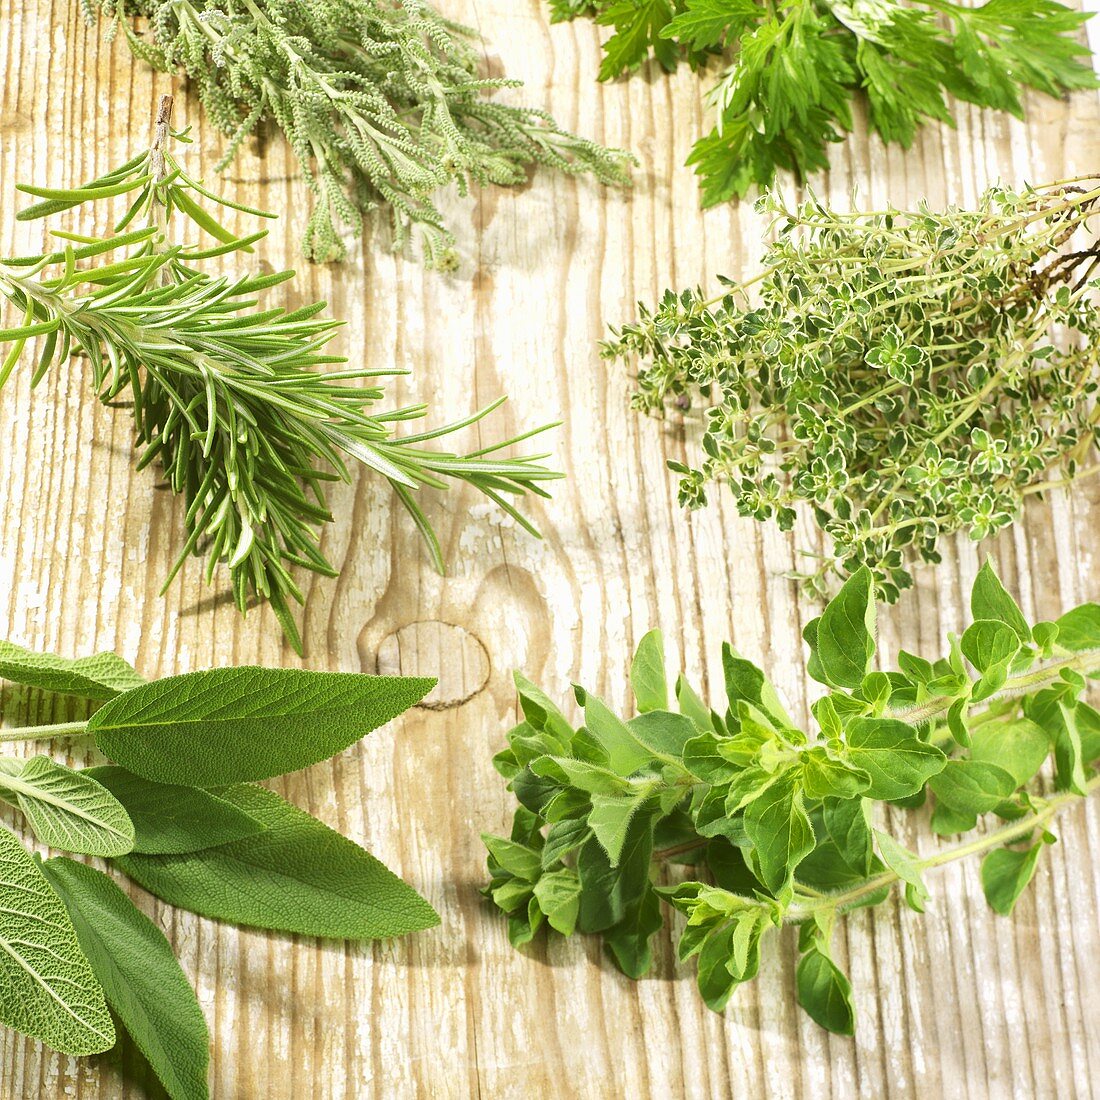 A selection of fresh herbs on wooden background